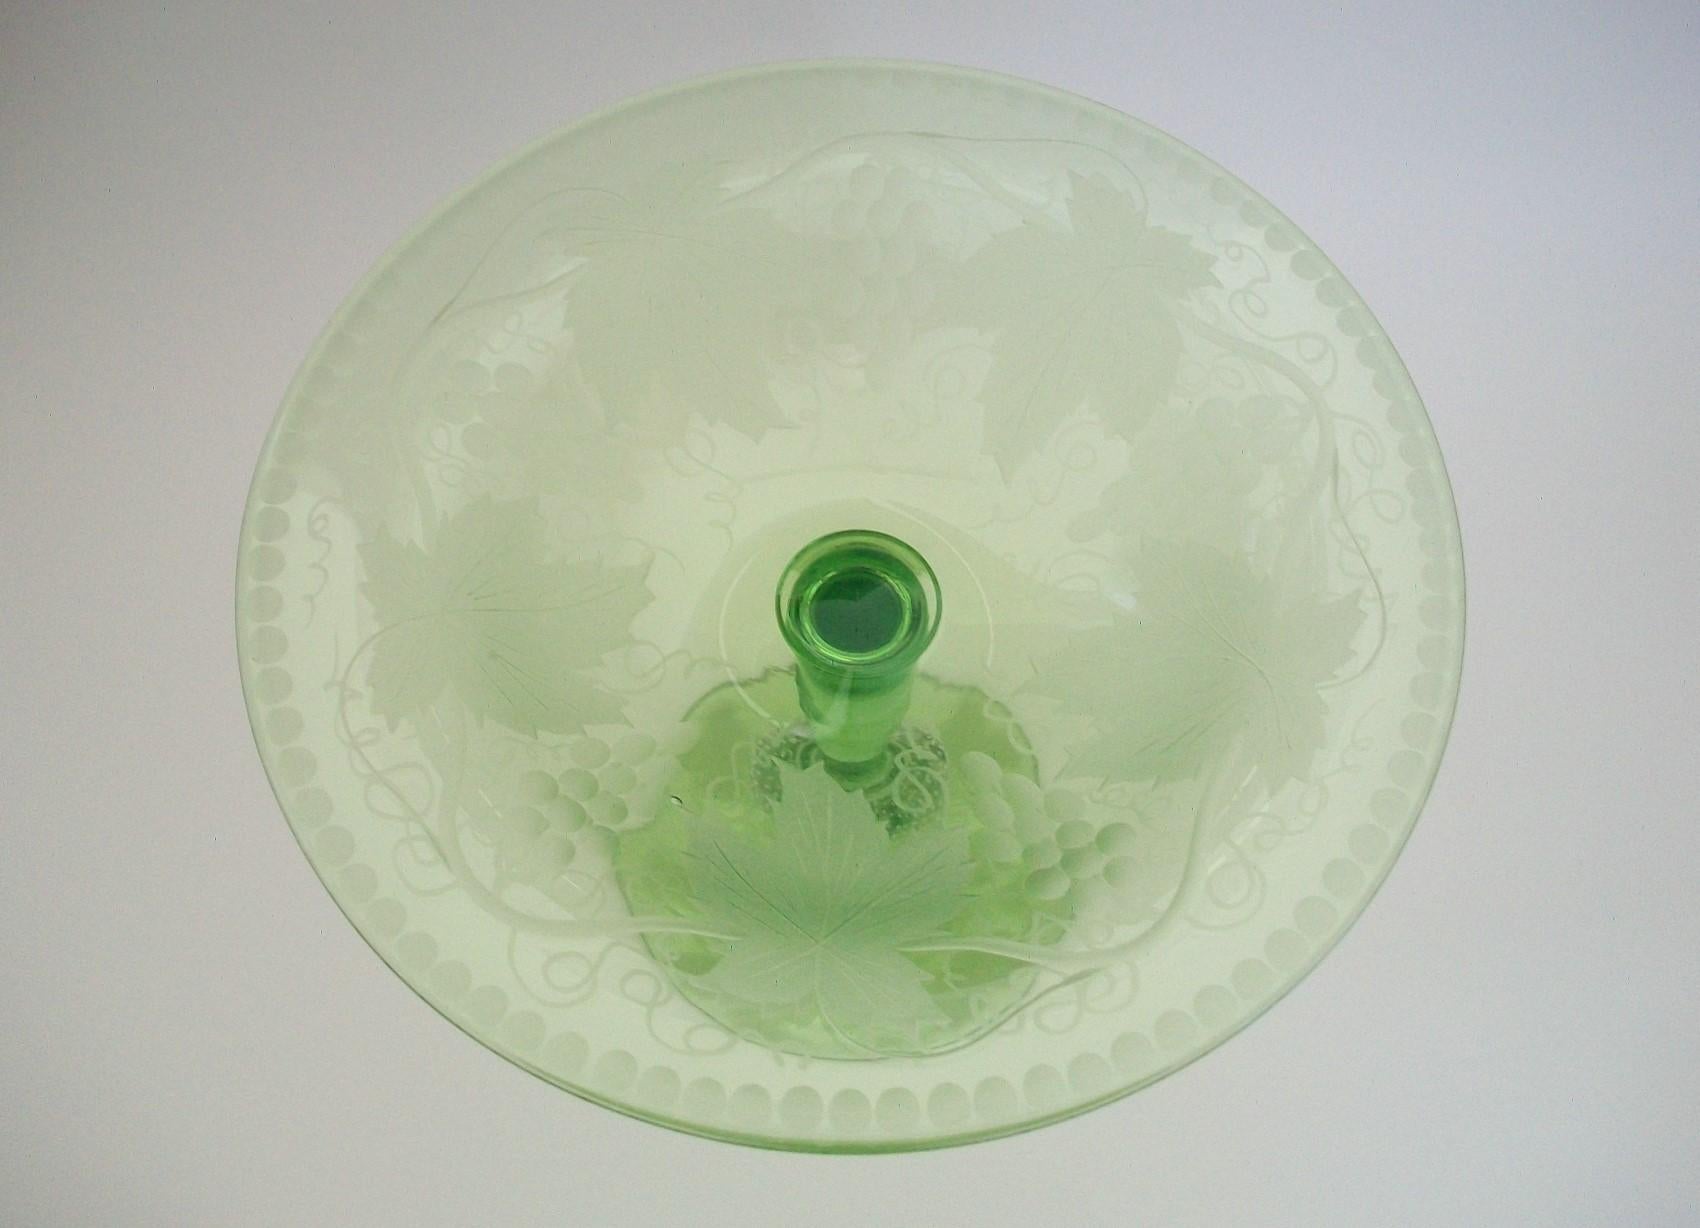 American Classical Pairpoint - Etched Glass Compote with Controlled Bubbles - U.S.a. - circa 1930 For Sale